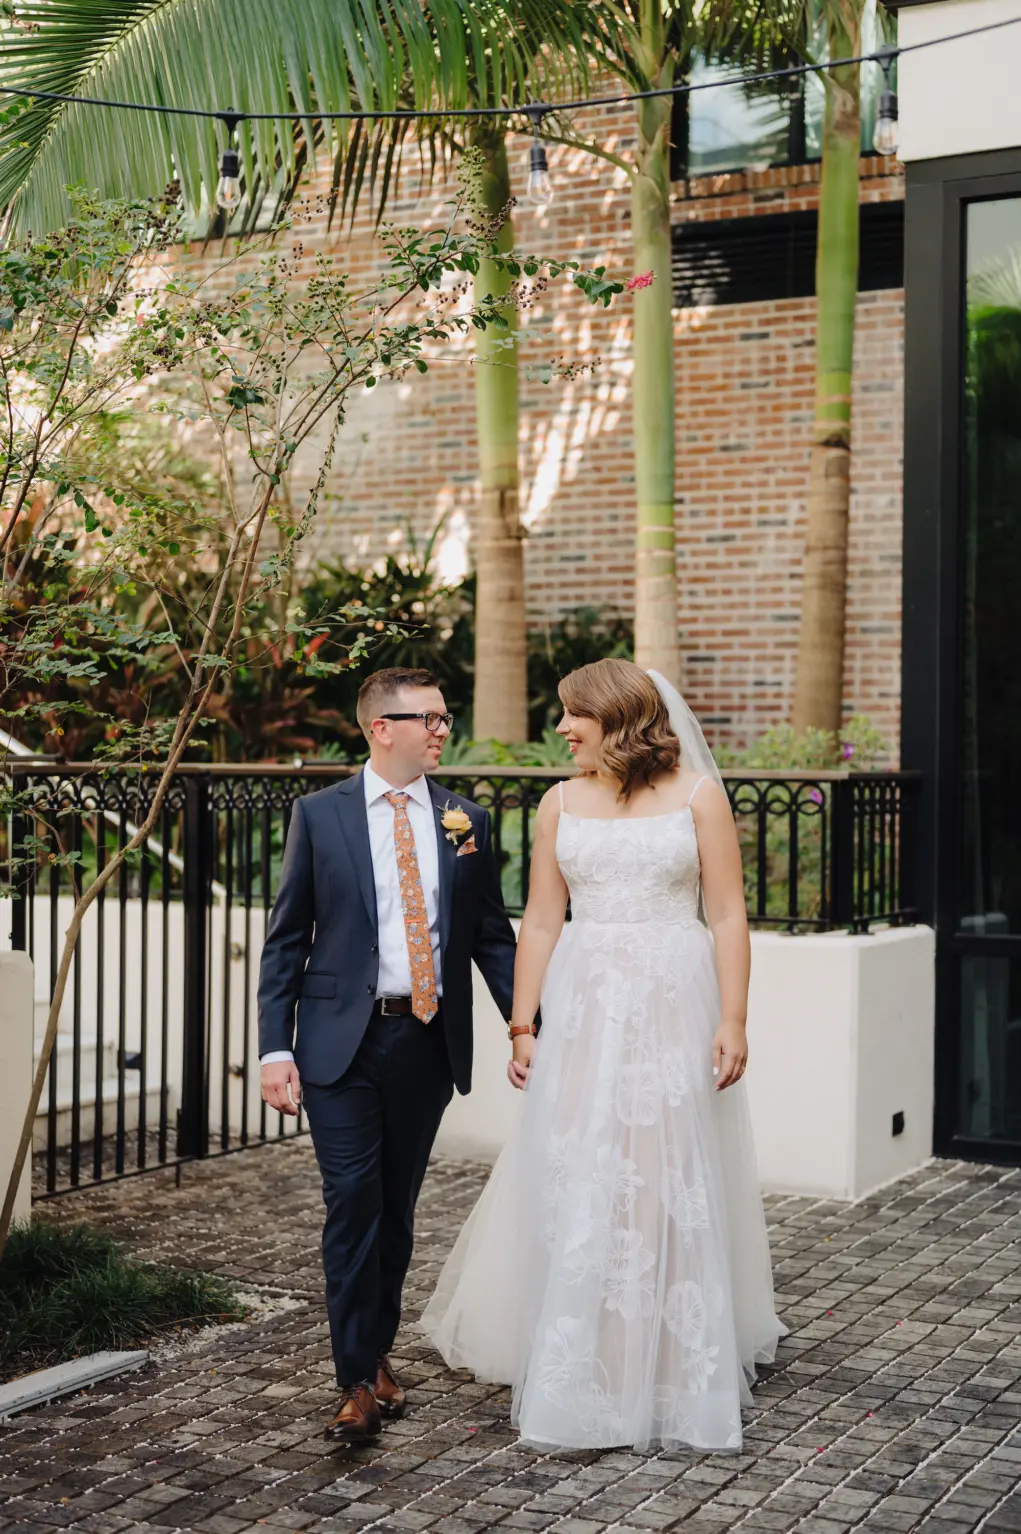 Bride and Groom First Look Courtyard Wedding Portrait | Lace Nude A-line Wedding Dress with Spaghetti Straps Ideas